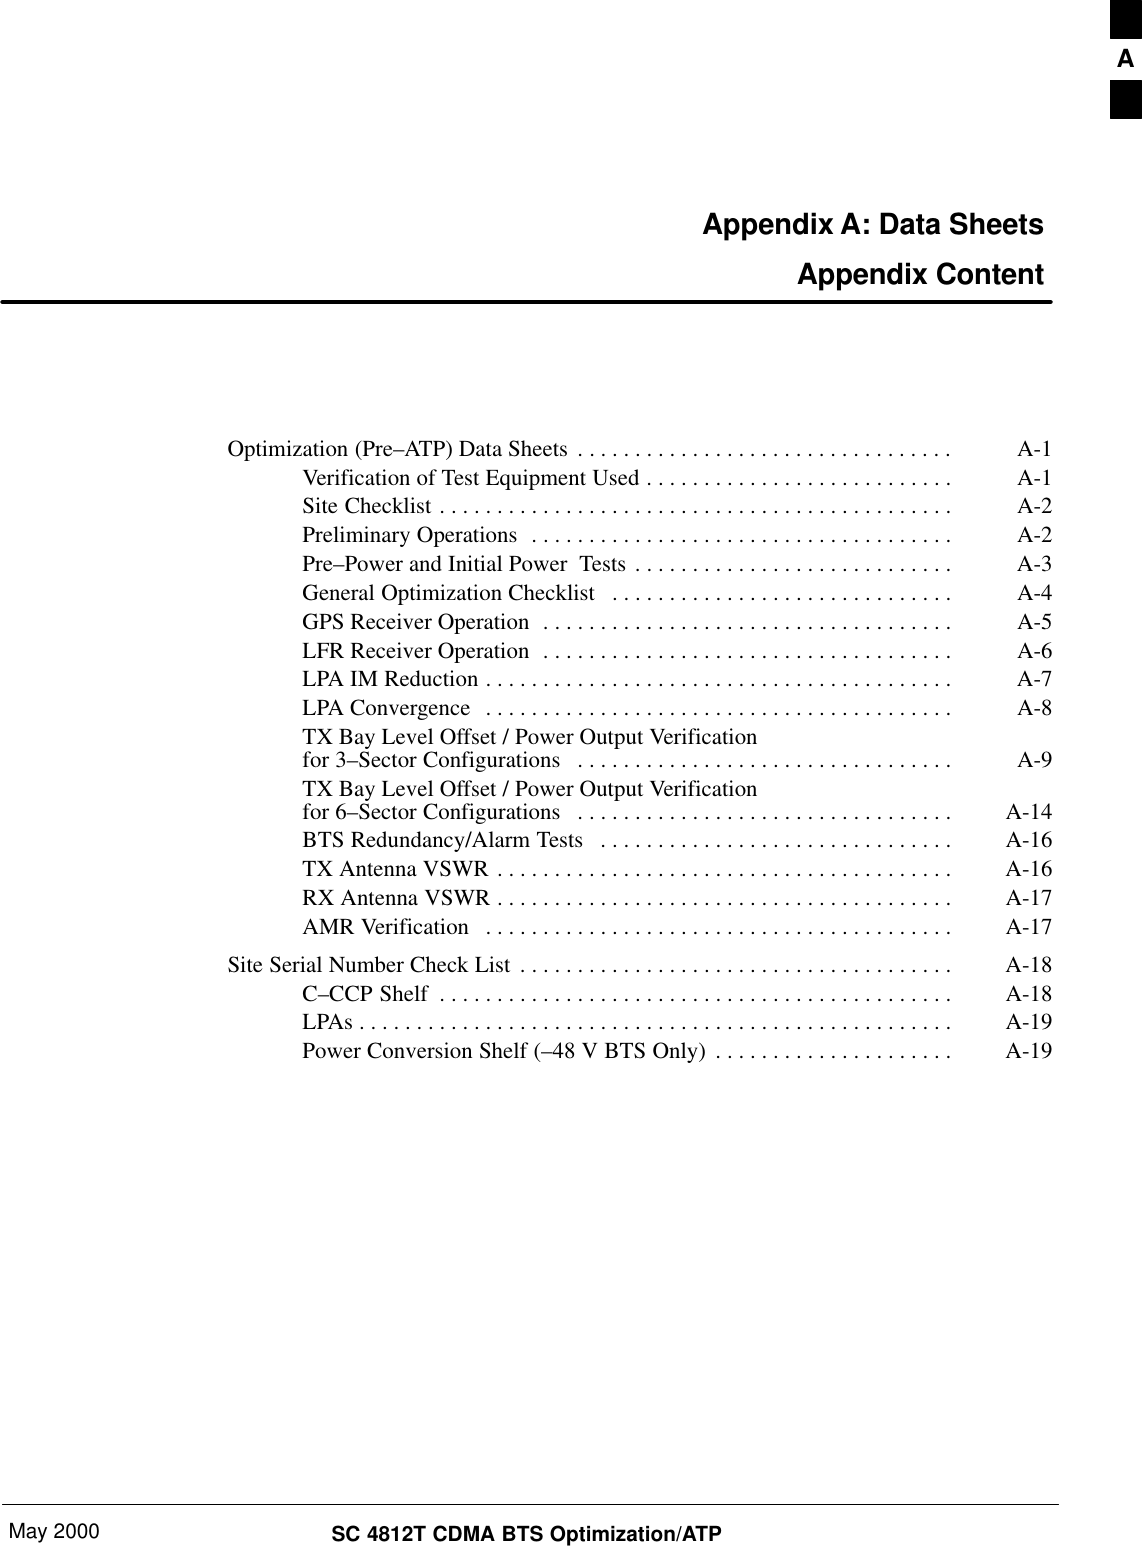 May 2000 SC 4812T CDMA BTS Optimization/ATPAppendix A: Data Sheets Appendix ContentOptimization (Pre–ATP) Data Sheets A-1. . . . . . . . . . . . . . . . . . . . . . . . . . . . . . . . . Verification of Test Equipment Used A-1. . . . . . . . . . . . . . . . . . . . . . . . . . . Site Checklist A-2. . . . . . . . . . . . . . . . . . . . . . . . . . . . . . . . . . . . . . . . . . . . . Preliminary Operations A-2. . . . . . . . . . . . . . . . . . . . . . . . . . . . . . . . . . . . . Pre–Power and Initial Power  Tests A-3. . . . . . . . . . . . . . . . . . . . . . . . . . . . General Optimization Checklist A-4. . . . . . . . . . . . . . . . . . . . . . . . . . . . . . GPS Receiver Operation A-5. . . . . . . . . . . . . . . . . . . . . . . . . . . . . . . . . . . . LFR Receiver Operation A-6. . . . . . . . . . . . . . . . . . . . . . . . . . . . . . . . . . . . LPA IM Reduction A-7. . . . . . . . . . . . . . . . . . . . . . . . . . . . . . . . . . . . . . . . . LPA Convergence A-8. . . . . . . . . . . . . . . . . . . . . . . . . . . . . . . . . . . . . . . . . TX Bay Level Offset / Power Output Verificationfor 3–Sector Configurations A-9. . . . . . . . . . . . . . . . . . . . . . . . . . . . . . . . . TX Bay Level Offset / Power Output Verificationfor 6–Sector Configurations A-14. . . . . . . . . . . . . . . . . . . . . . . . . . . . . . . . . BTS Redundancy/Alarm Tests A-16. . . . . . . . . . . . . . . . . . . . . . . . . . . . . . . TX Antenna VSWR A-16. . . . . . . . . . . . . . . . . . . . . . . . . . . . . . . . . . . . . . . . RX Antenna VSWR A-17. . . . . . . . . . . . . . . . . . . . . . . . . . . . . . . . . . . . . . . . AMR Verification A-17. . . . . . . . . . . . . . . . . . . . . . . . . . . . . . . . . . . . . . . . . Site Serial Number Check List A-18. . . . . . . . . . . . . . . . . . . . . . . . . . . . . . . . . . . . . . C–CCP Shelf A-18. . . . . . . . . . . . . . . . . . . . . . . . . . . . . . . . . . . . . . . . . . . . . LPAs A-19. . . . . . . . . . . . . . . . . . . . . . . . . . . . . . . . . . . . . . . . . . . . . . . . . . . . Power Conversion Shelf (–48 V BTS Only) A-19. . . . . . . . . . . . . . . . . . . . . A